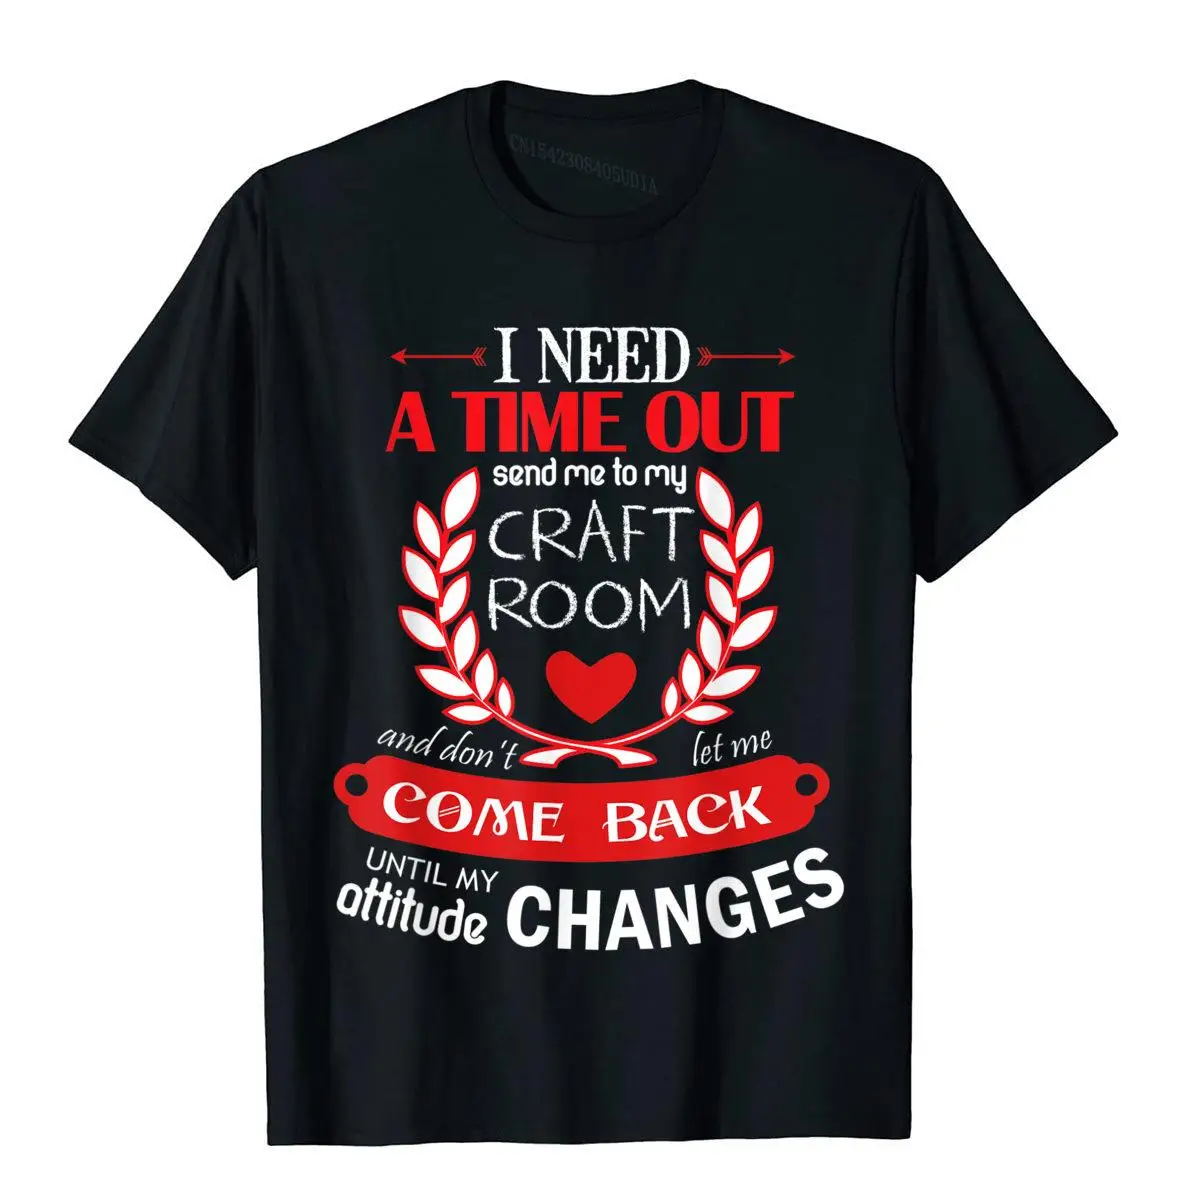 

I Need A Time Out Send Me To My Craft Room T Shirts Cotton Funny Tops Shirts Funny Men Top T-Shirts Design Harajuku Camisas